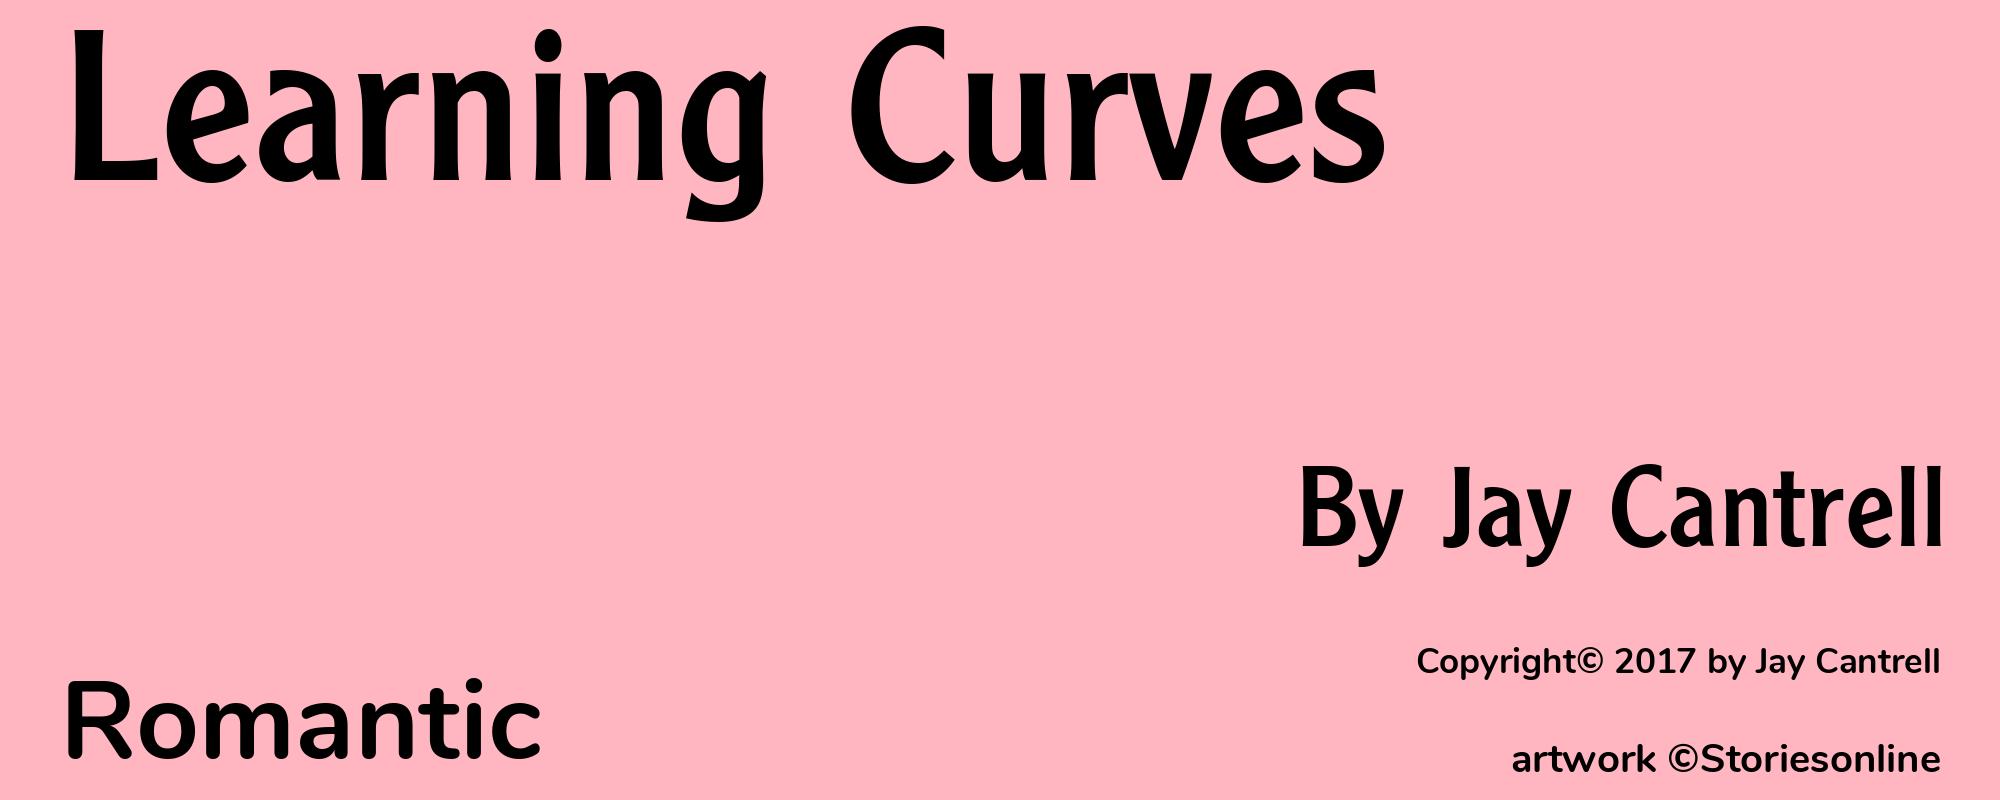 Learning Curves - Cover